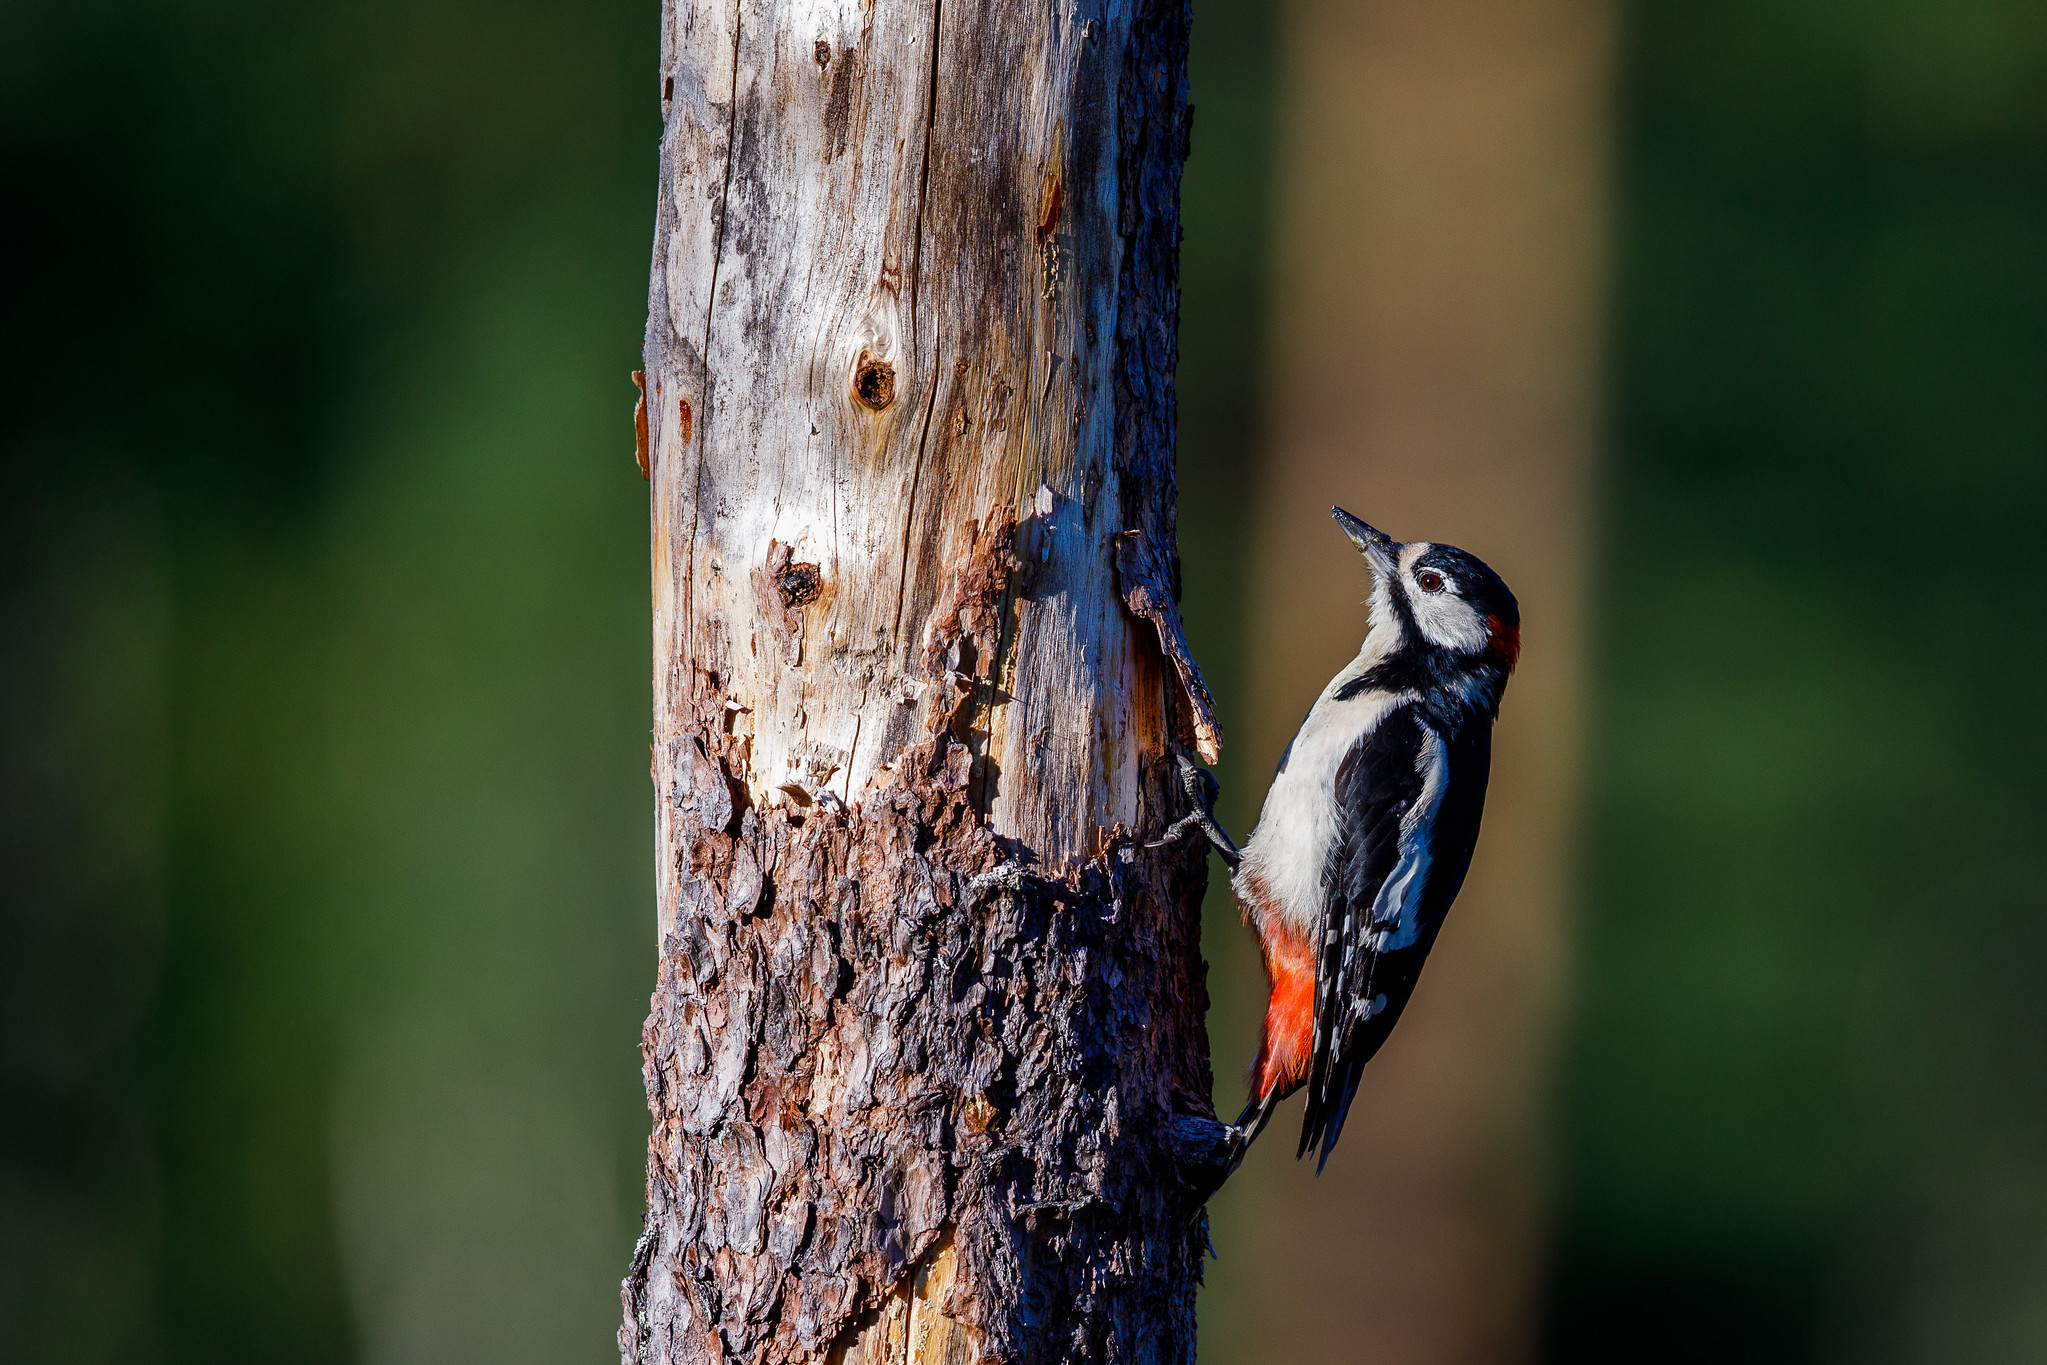 Great spotted Woodpecker - Brown bears in Finland